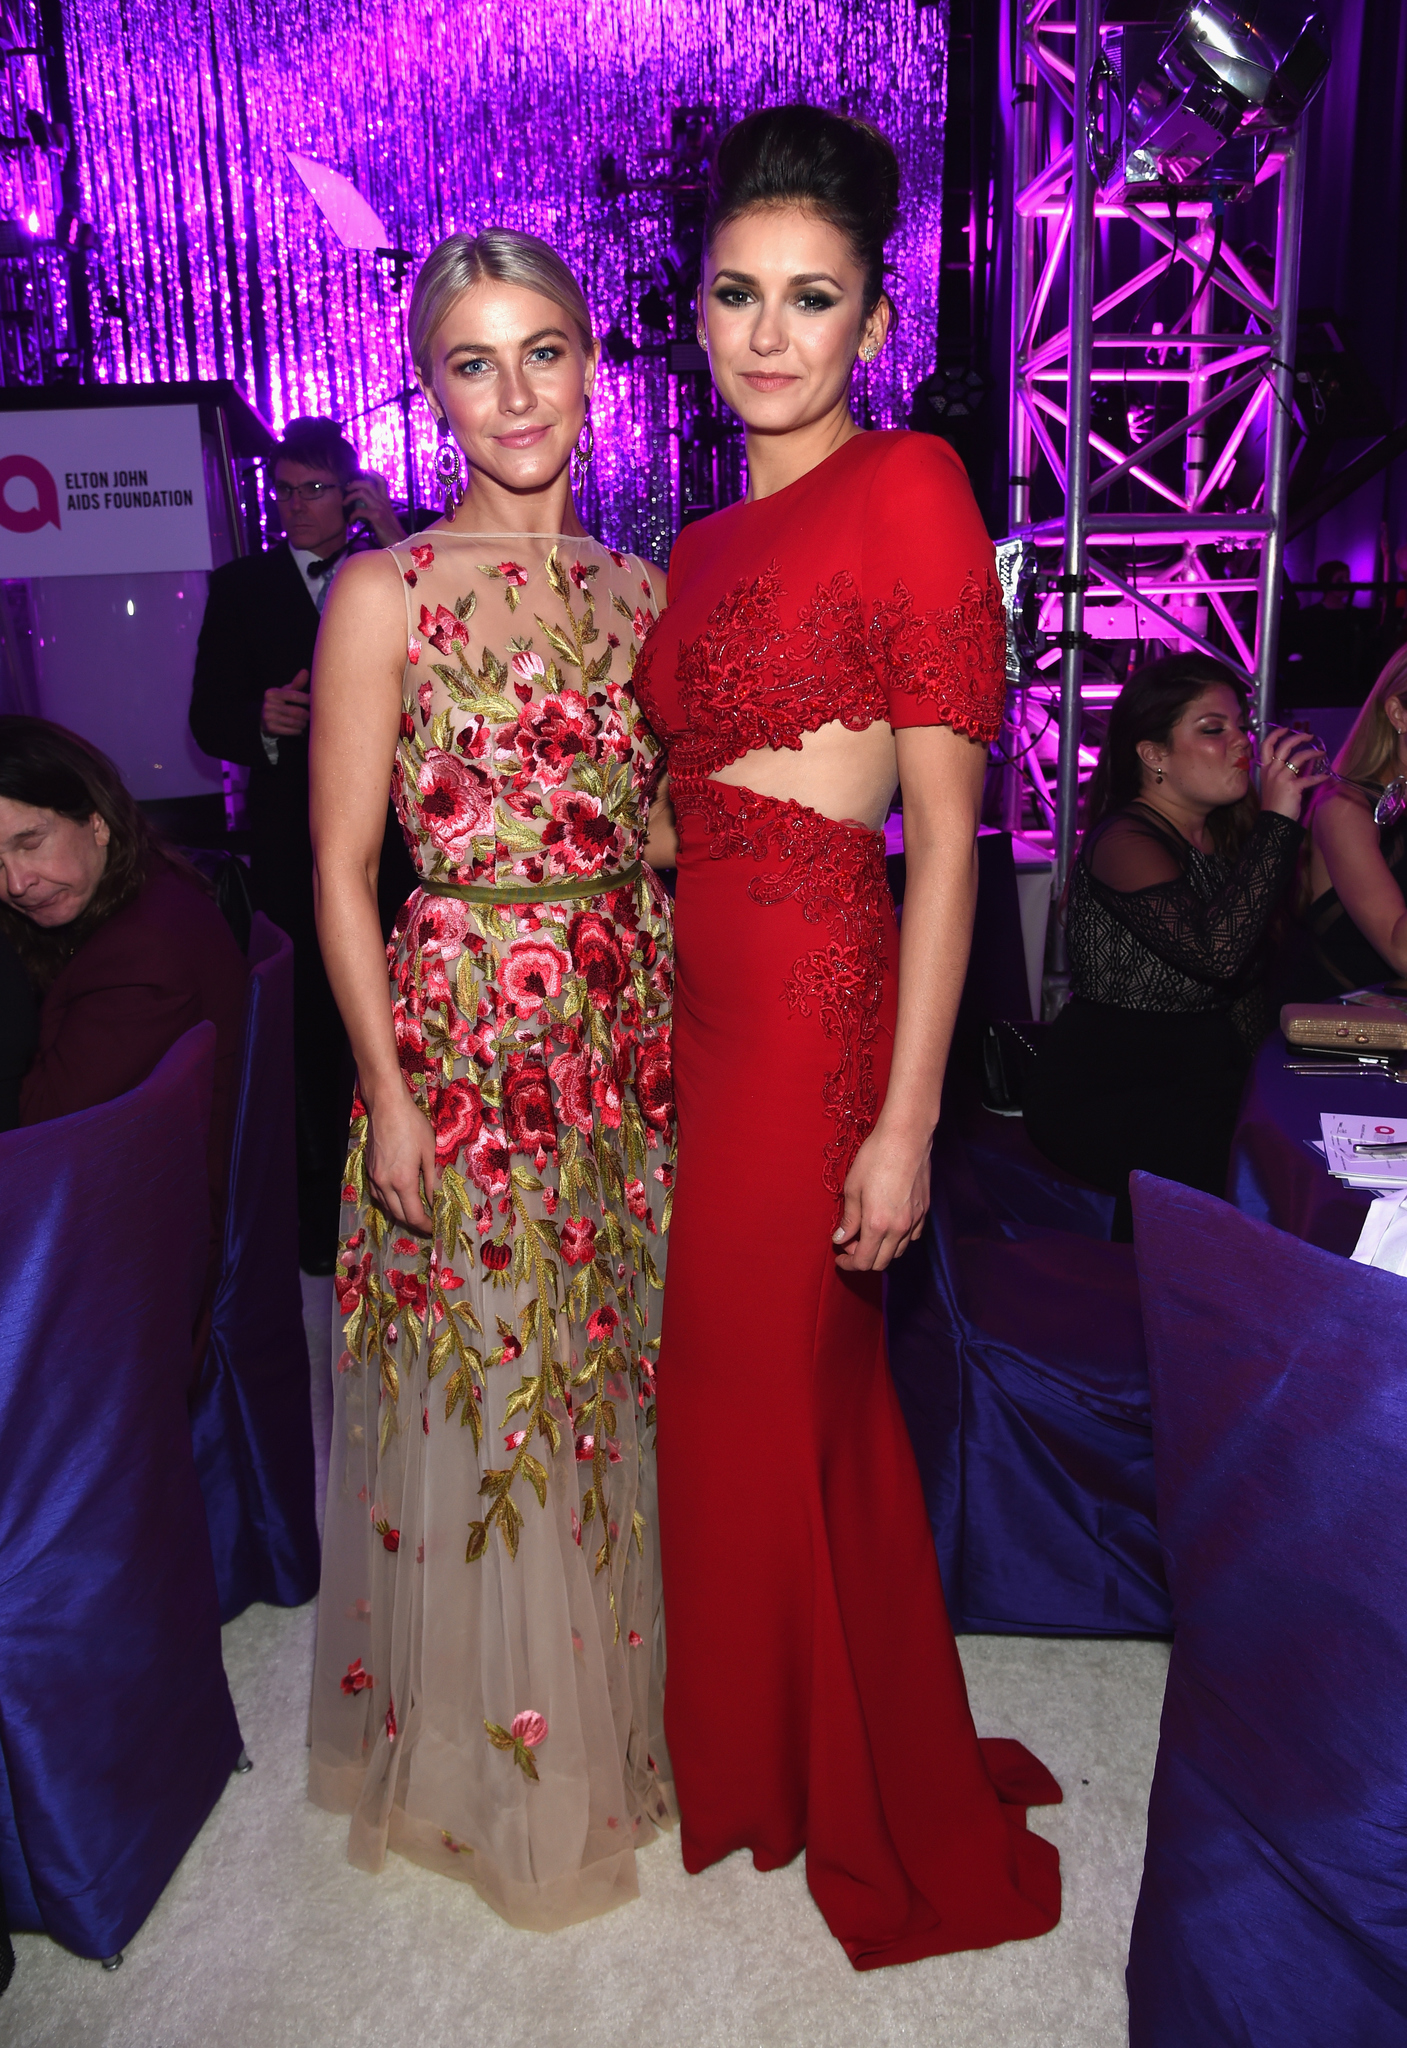 Nina Dobrev and Julianne Hough at event of The Oscars (2015)